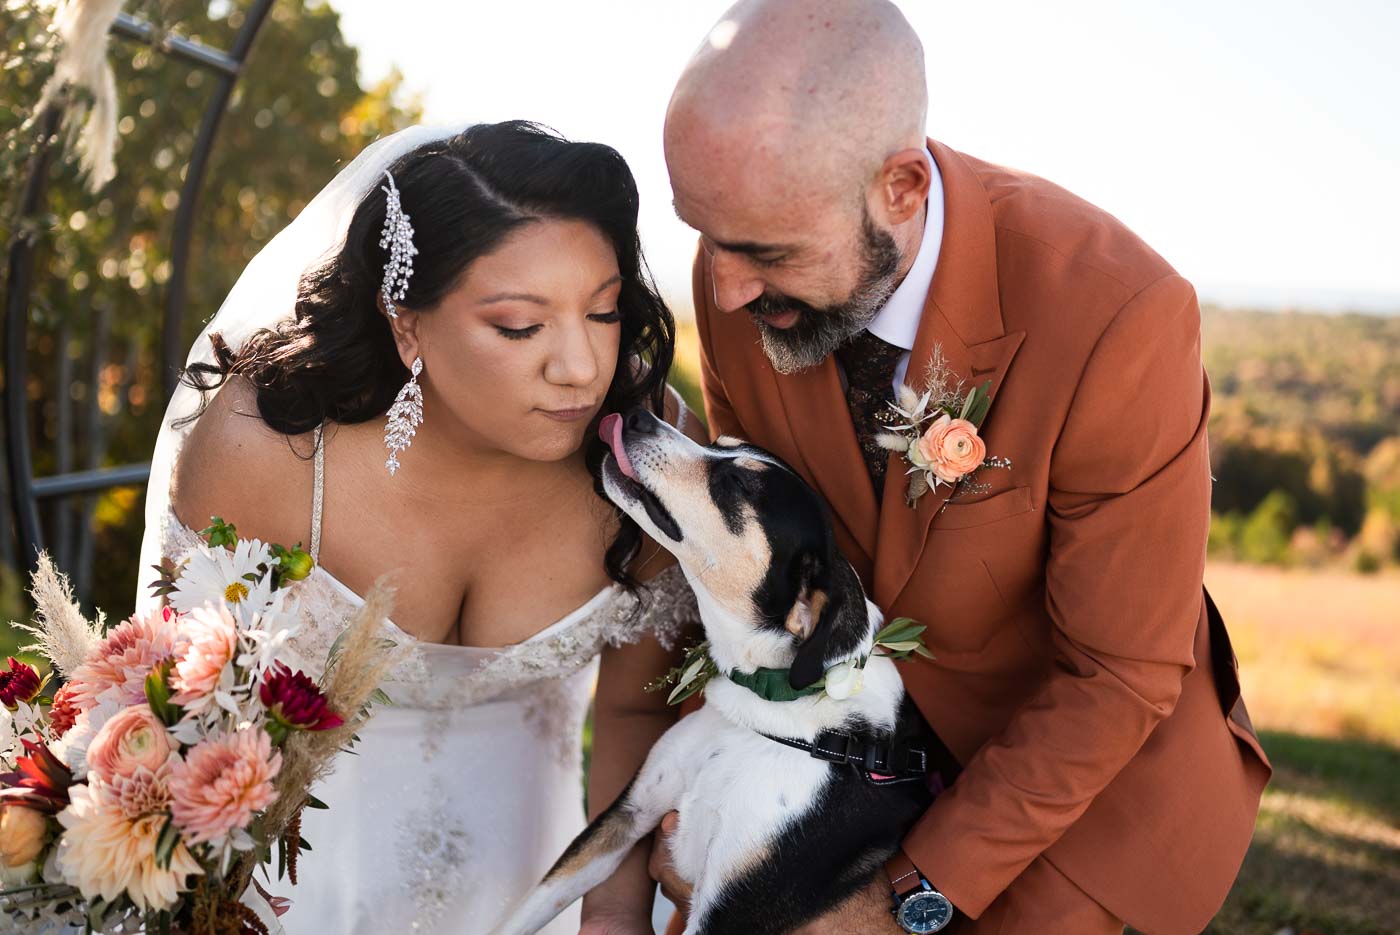 Dog giving the bride puppy kisses